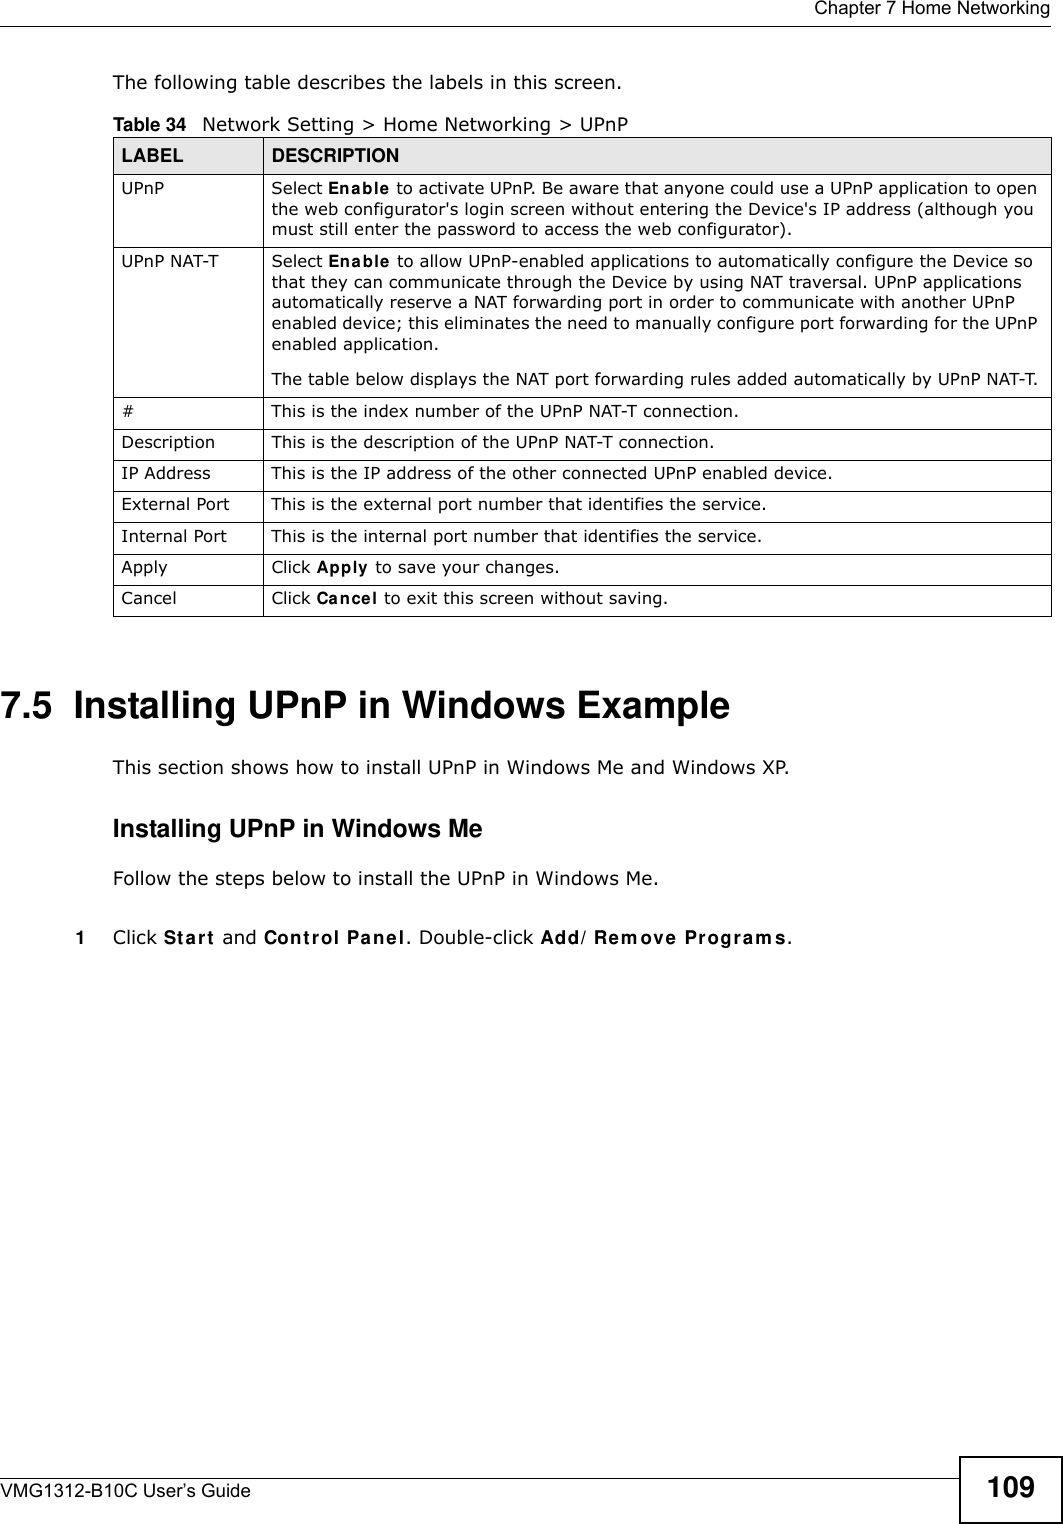  Chapter 7 Home NetworkingVMG1312-B10C User’s Guide 109The following table describes the labels in this screen.7.5  Installing UPnP in Windows ExampleThis section shows how to install UPnP in Windows Me and Windows XP. Installing UPnP in Windows MeFollow the steps below to install the UPnP in Windows Me. 1Click St a r t  and Cont rol Pa ne l. Double-click Add/ Re m ove Pr ogr a m s.Table 34   Network Setting &gt; Home Networking &gt; UPnPLABEL DESCRIPTIONUPnP Select En able  to activate UPnP. Be aware that anyone could use a UPnP application to open the web configurator&apos;s login screen without entering the Device&apos;s IP address (although you must still enter the password to access the web configurator).UPnP NAT-T Select Ena ble to allow UPnP-enabled applications to automatically configure the Device so that they can communicate through the Device by using NAT traversal. UPnP applications automatically reserve a NAT forwarding port in order to communicate with another UPnP enabled device; this eliminates the need to manually configure port forwarding for the UPnP enabled application. The table below displays the NAT port forwarding rules added automatically by UPnP NAT-T.# This is the index number of the UPnP NAT-T connection.Description This is the description of the UPnP NAT-T connection.IP Address This is the IP address of the other connected UPnP enabled device.External Port This is the external port number that identifies the service.Internal Port This is the internal port number that identifies the service.Apply Click Apply  to save your changes.Cancel Click Cancel to exit this screen without saving.